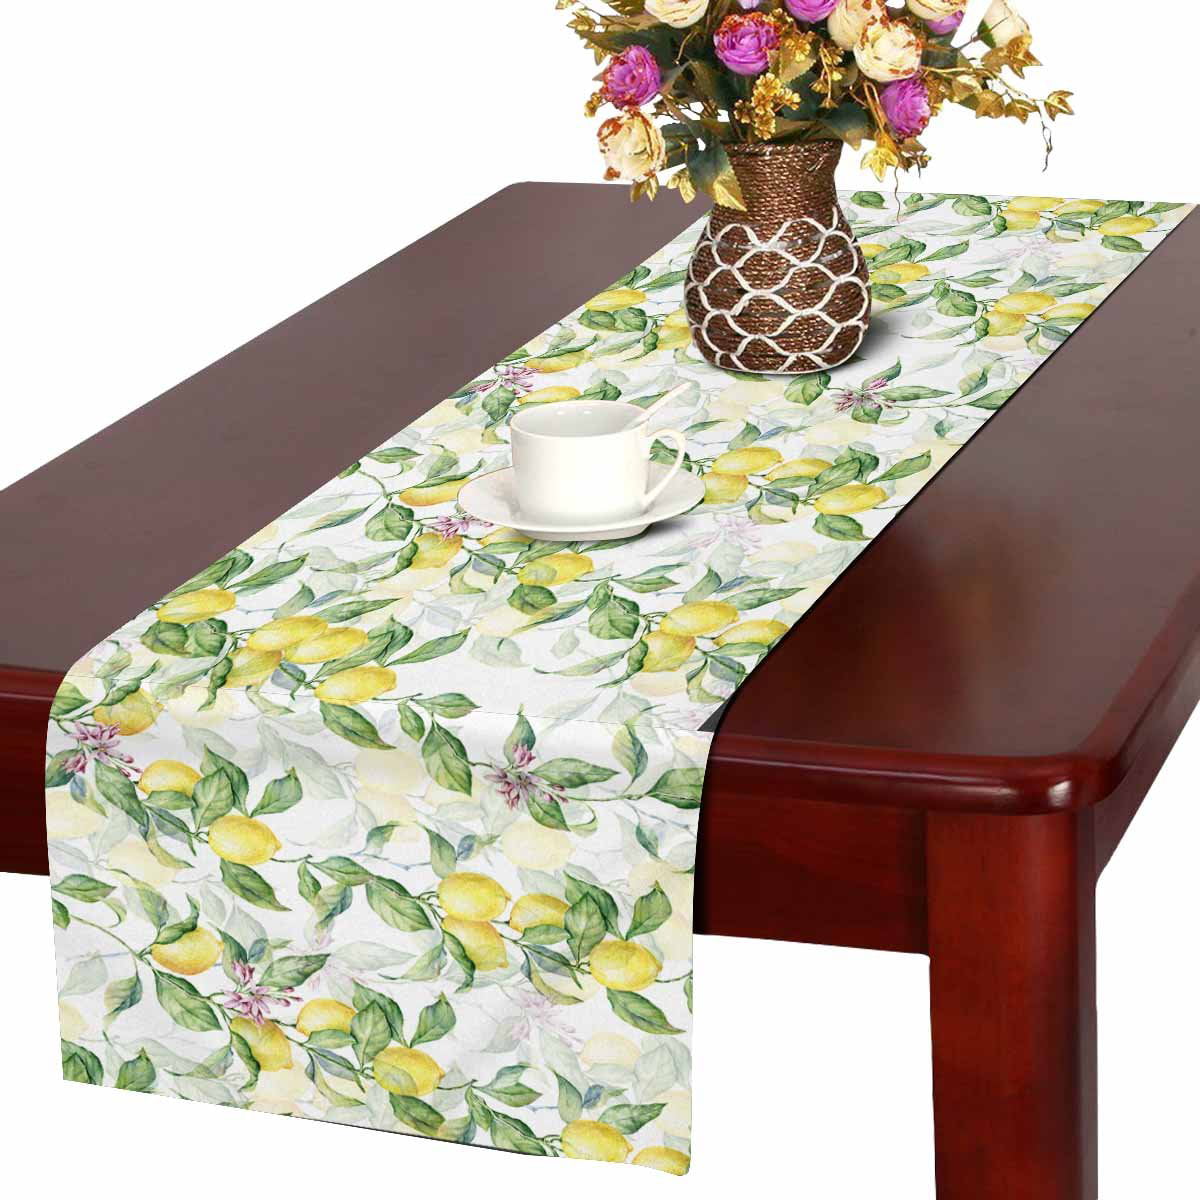 90 inches Long AUUXVA Summer Fruit Lemon Pattern Print Table Runner Heat Resistant for Home Holiday Party Dining Room Tabletop Decoration